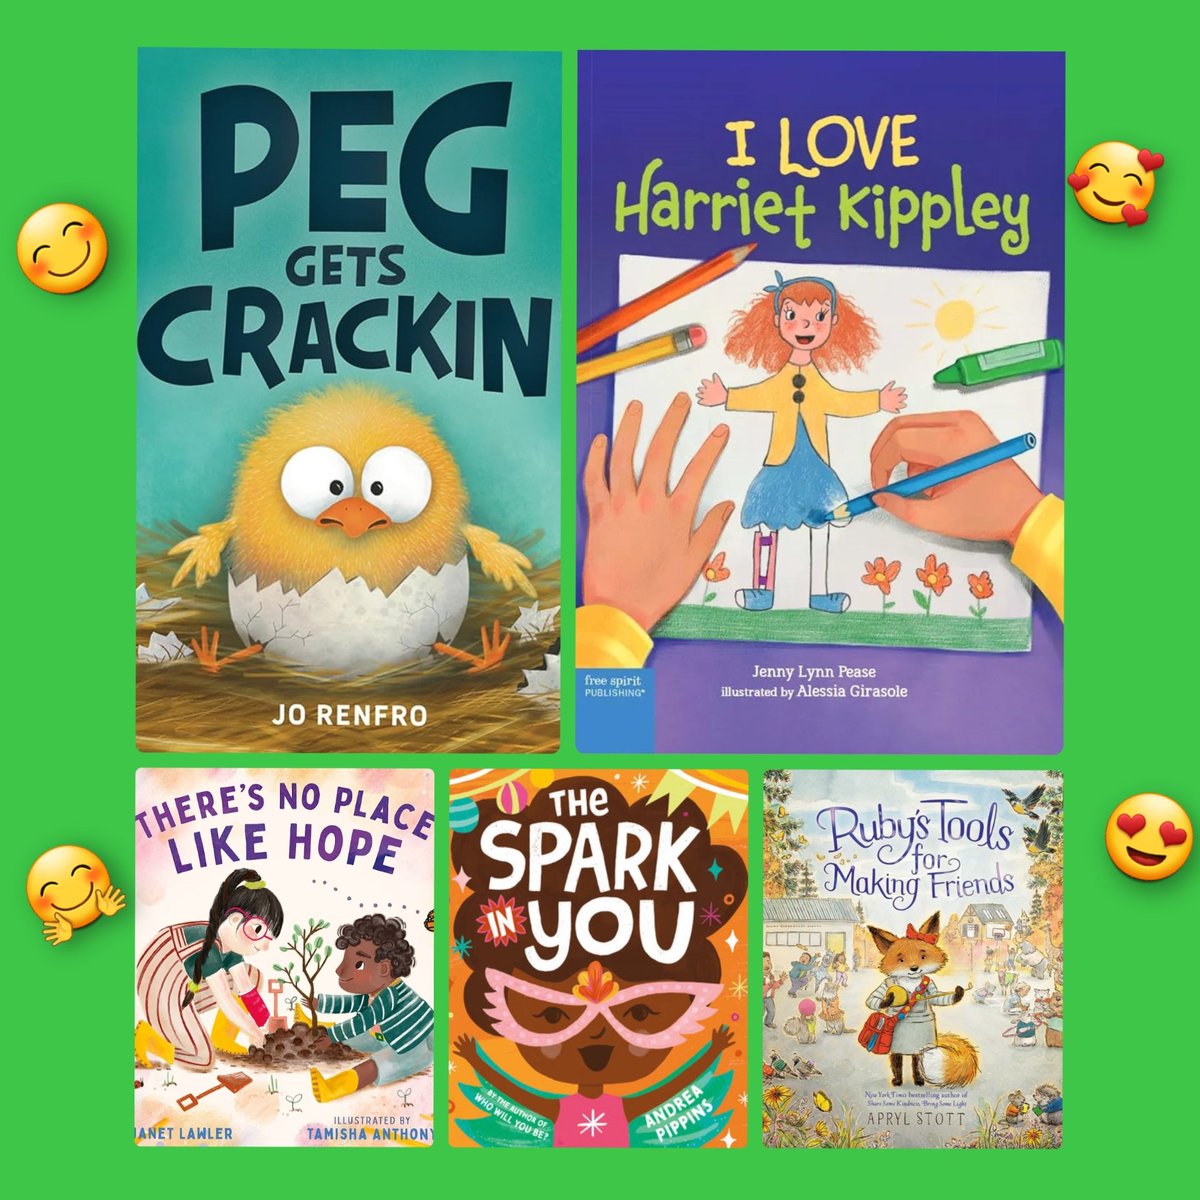 Yesterday was National Feelings day. I'm a day late, but it's not too late to celebrate these social emotional picture books. 😊 @RenfroJo @TamishaAnthony @andreagpippins @aprylstott